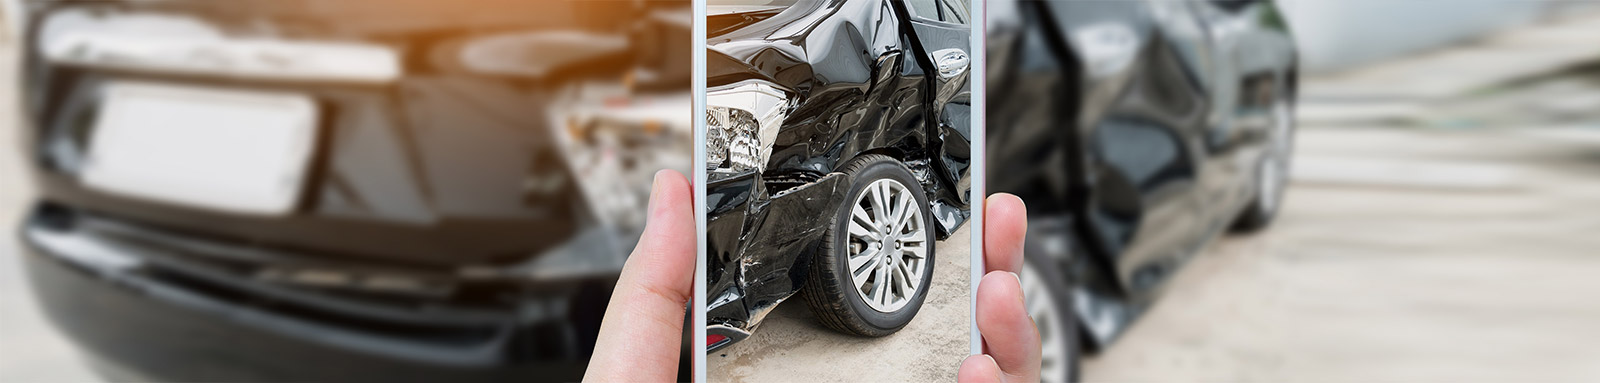 Hands with smartphone taking a photo of a damaged car